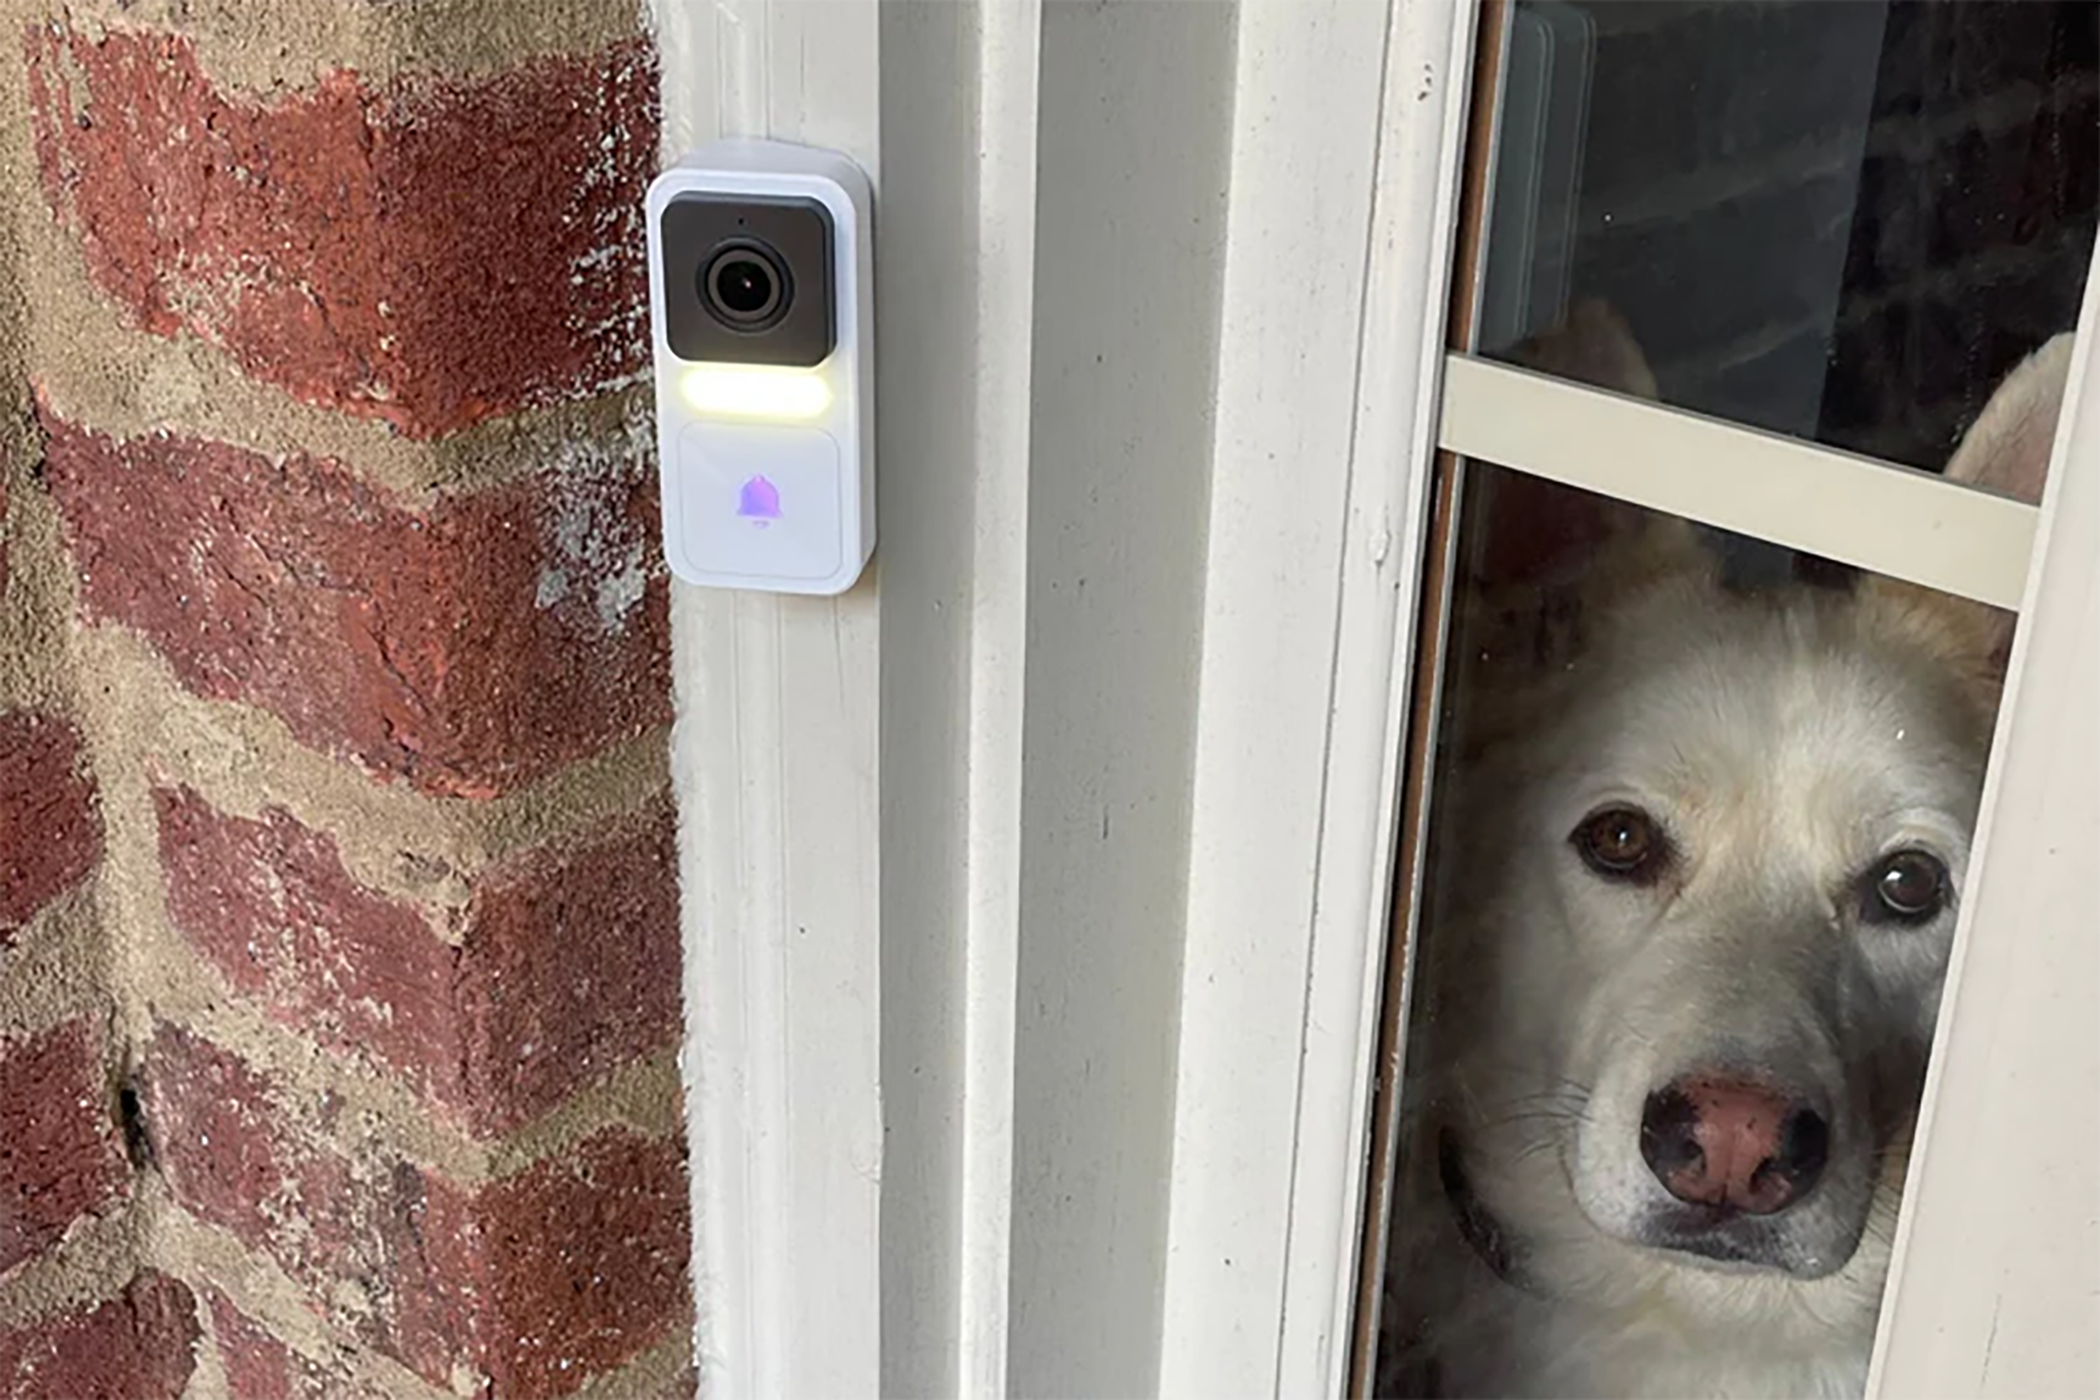 Wyze Video Doorbell installed on a white door pane next to a white dog looking out from inside the house.